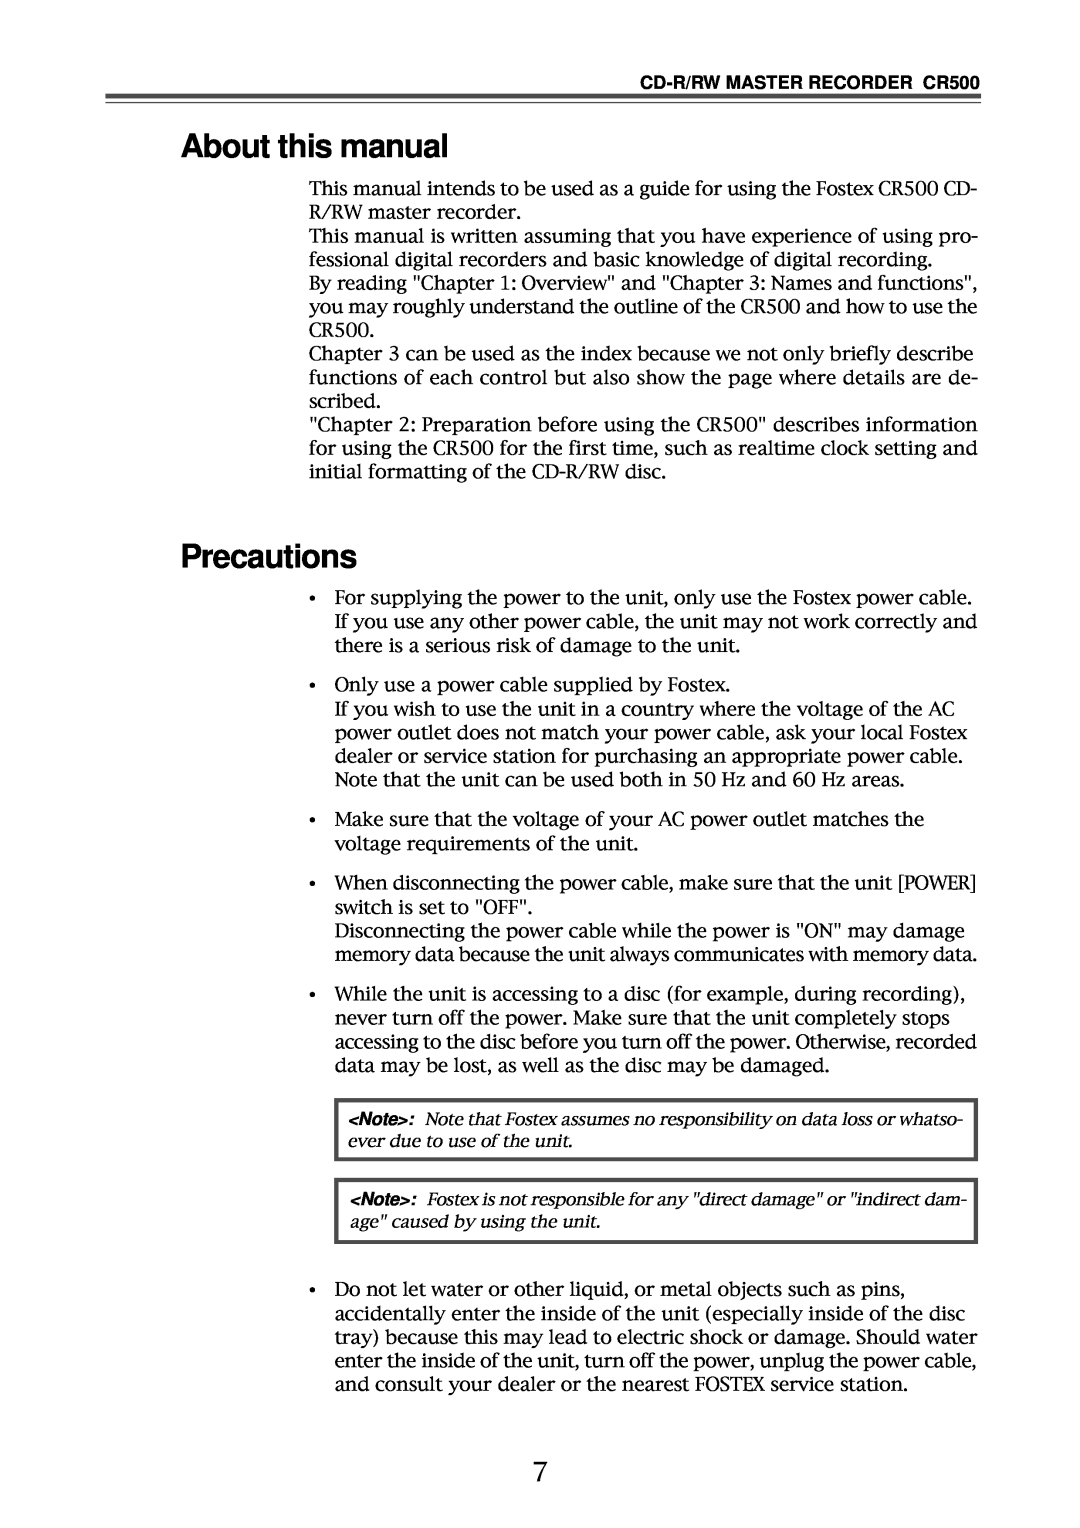 Fostex owner manual About this manual, Precautions, CD-R/RWMASTER RECORDER CR500 